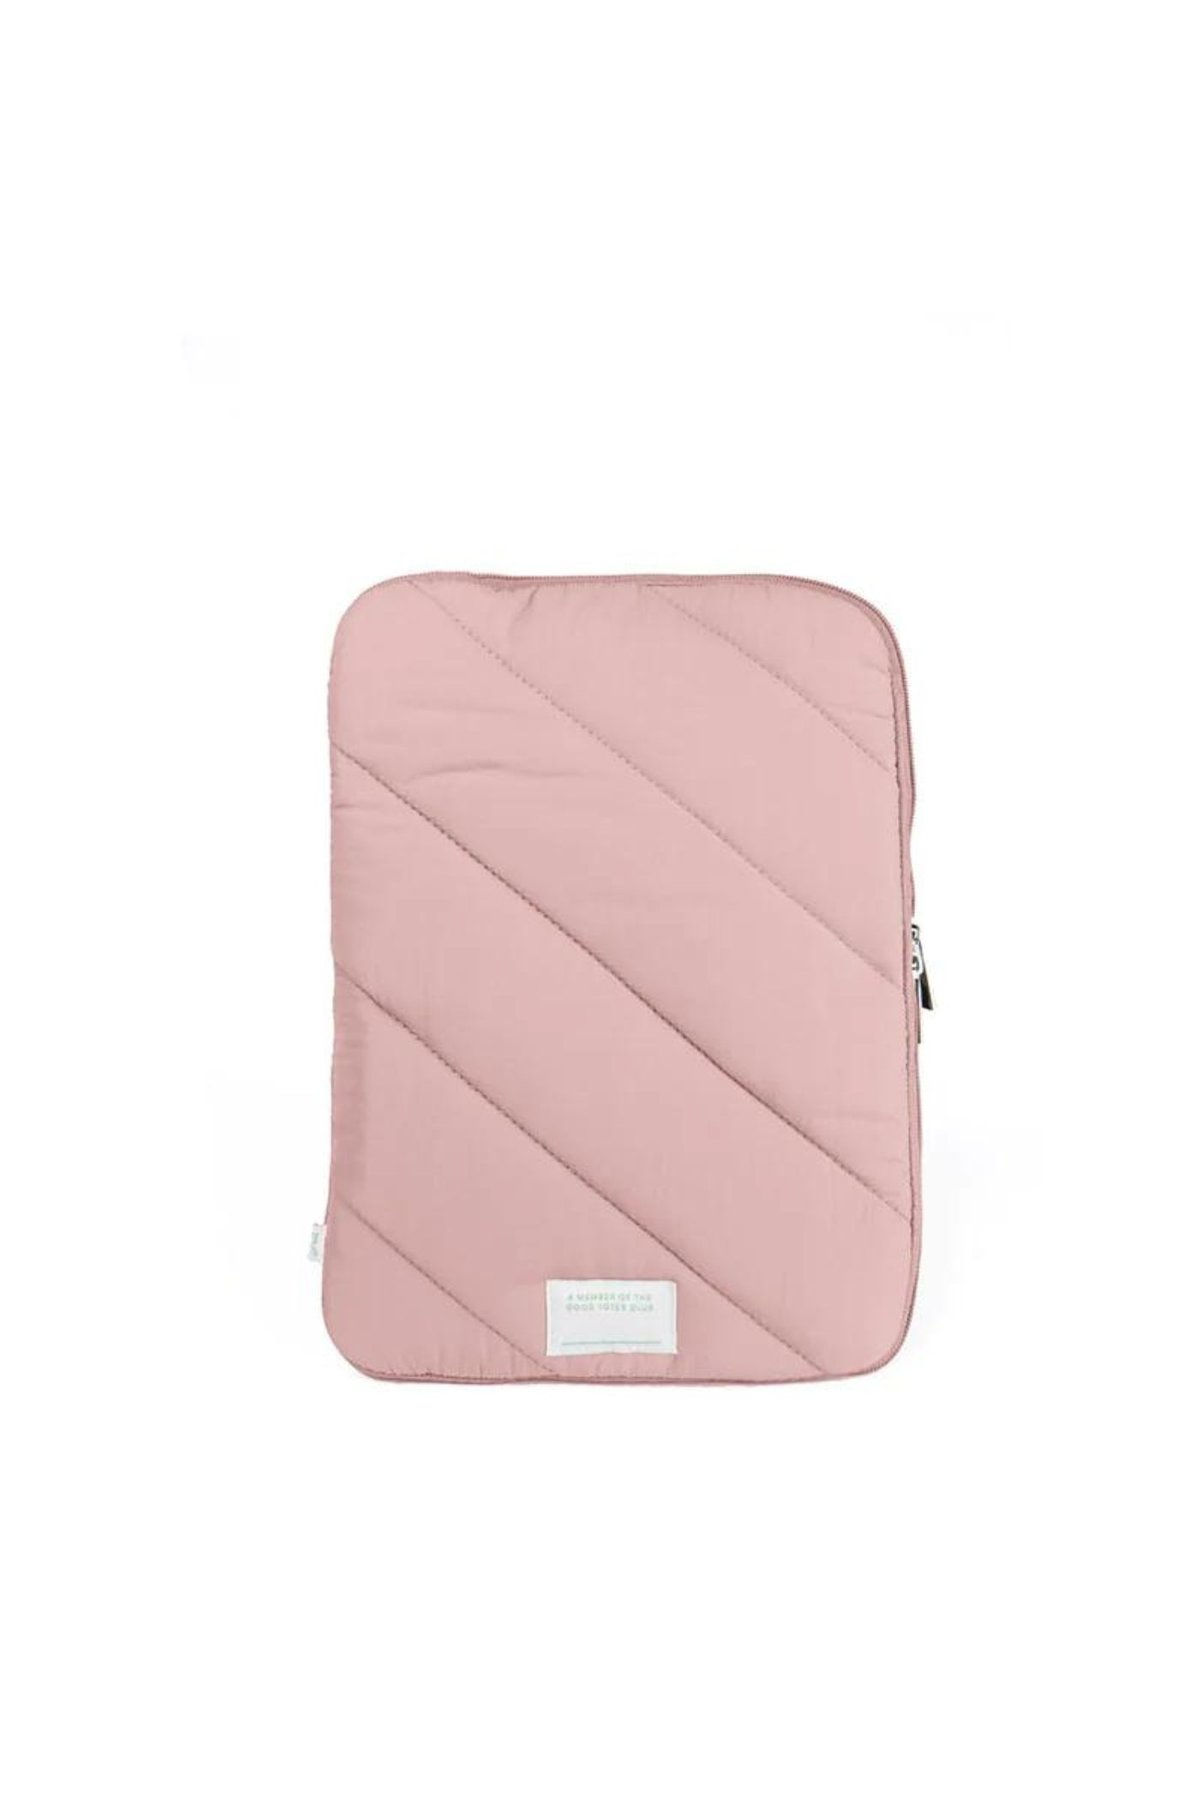 Good Totes (Pillow Laptop Sleeve - Strawberry 13")